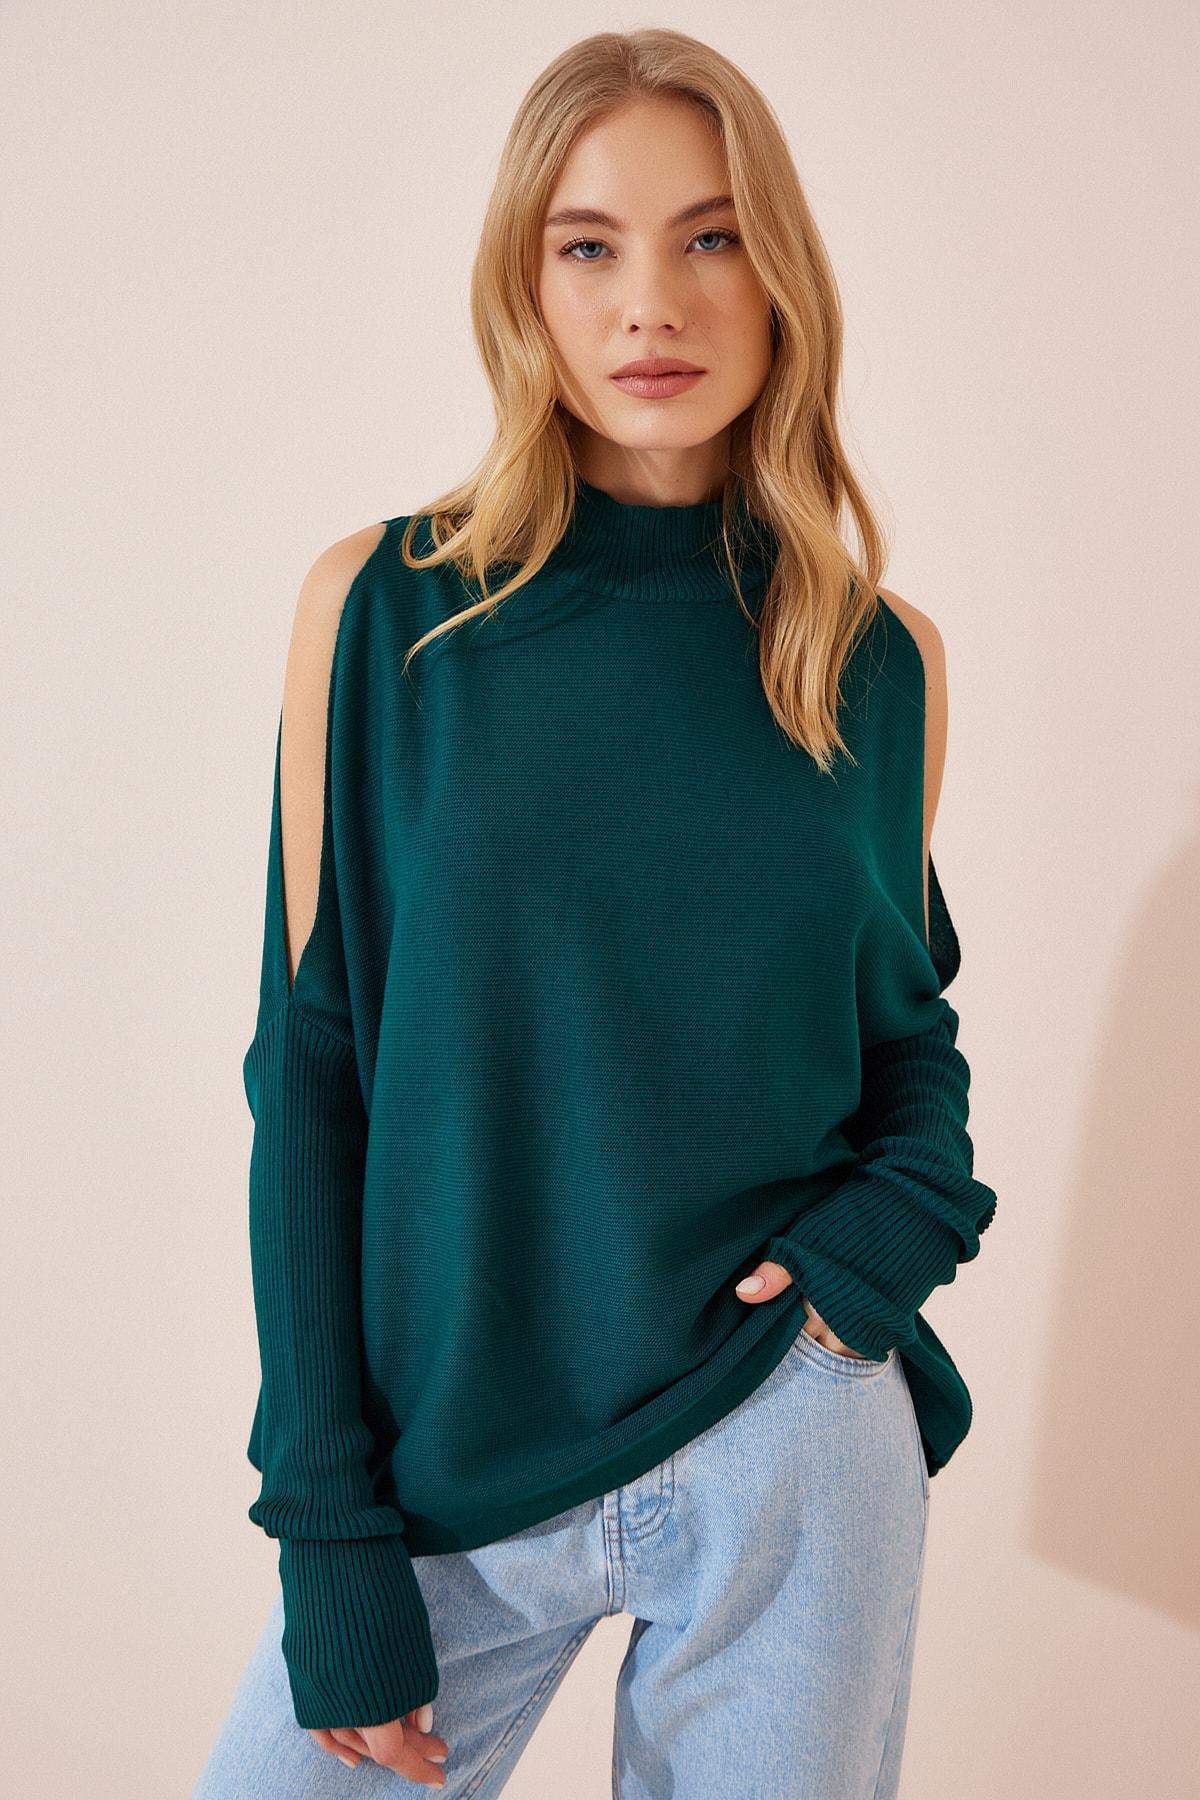 Happiness Istanbul - Green Basic Oversized Sweater